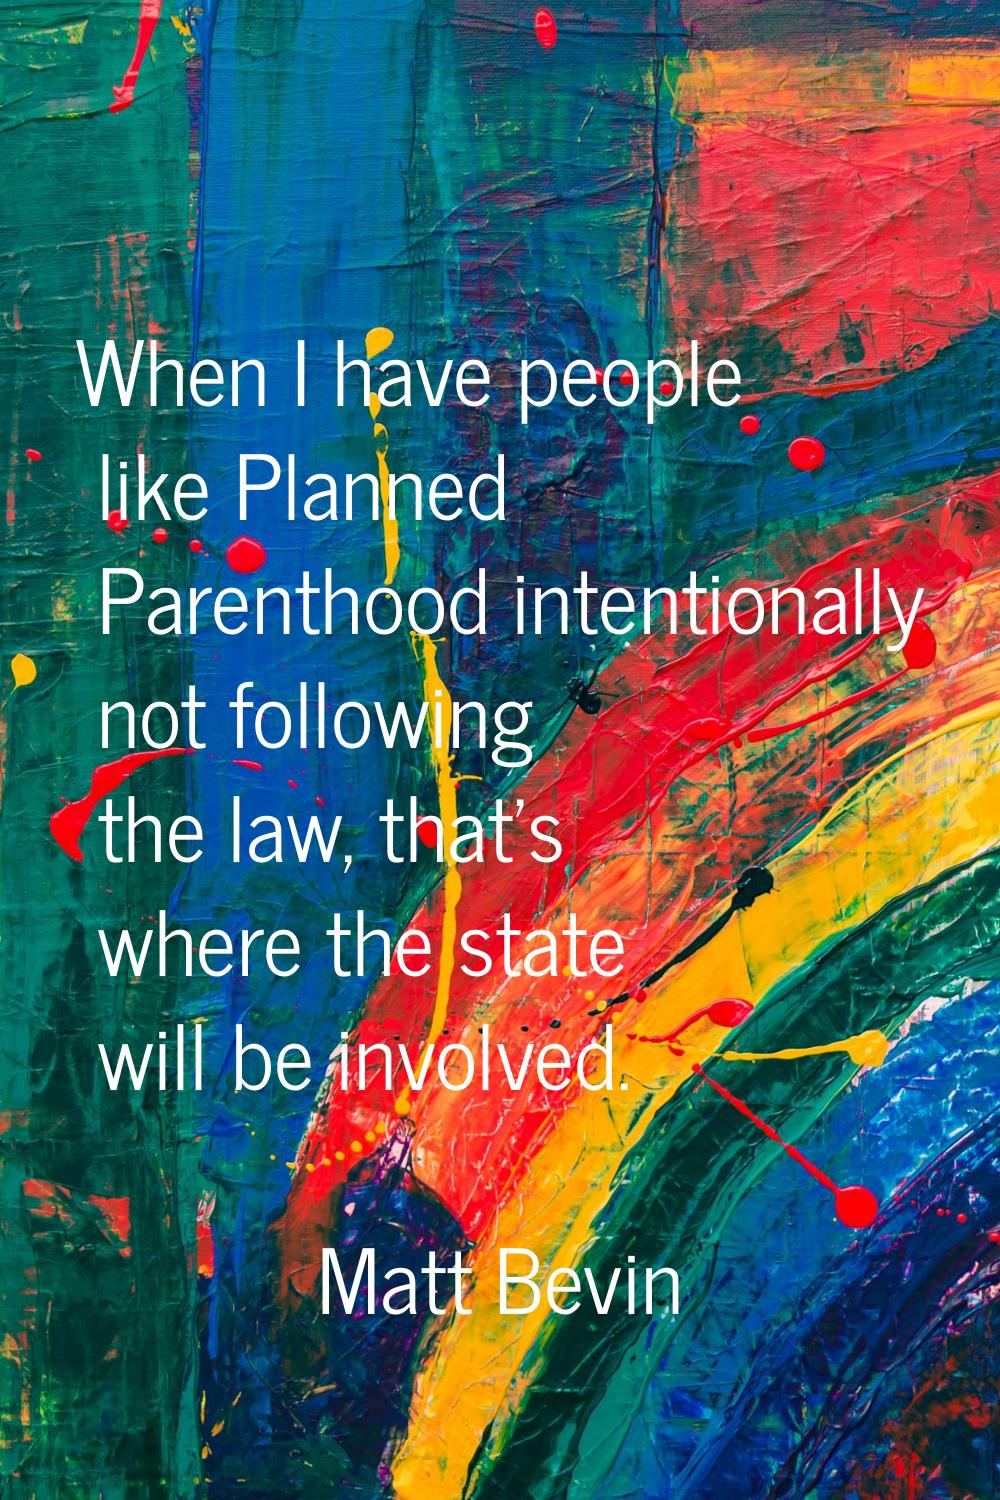 When I have people like Planned Parenthood intentionally not following the law, that's where the st